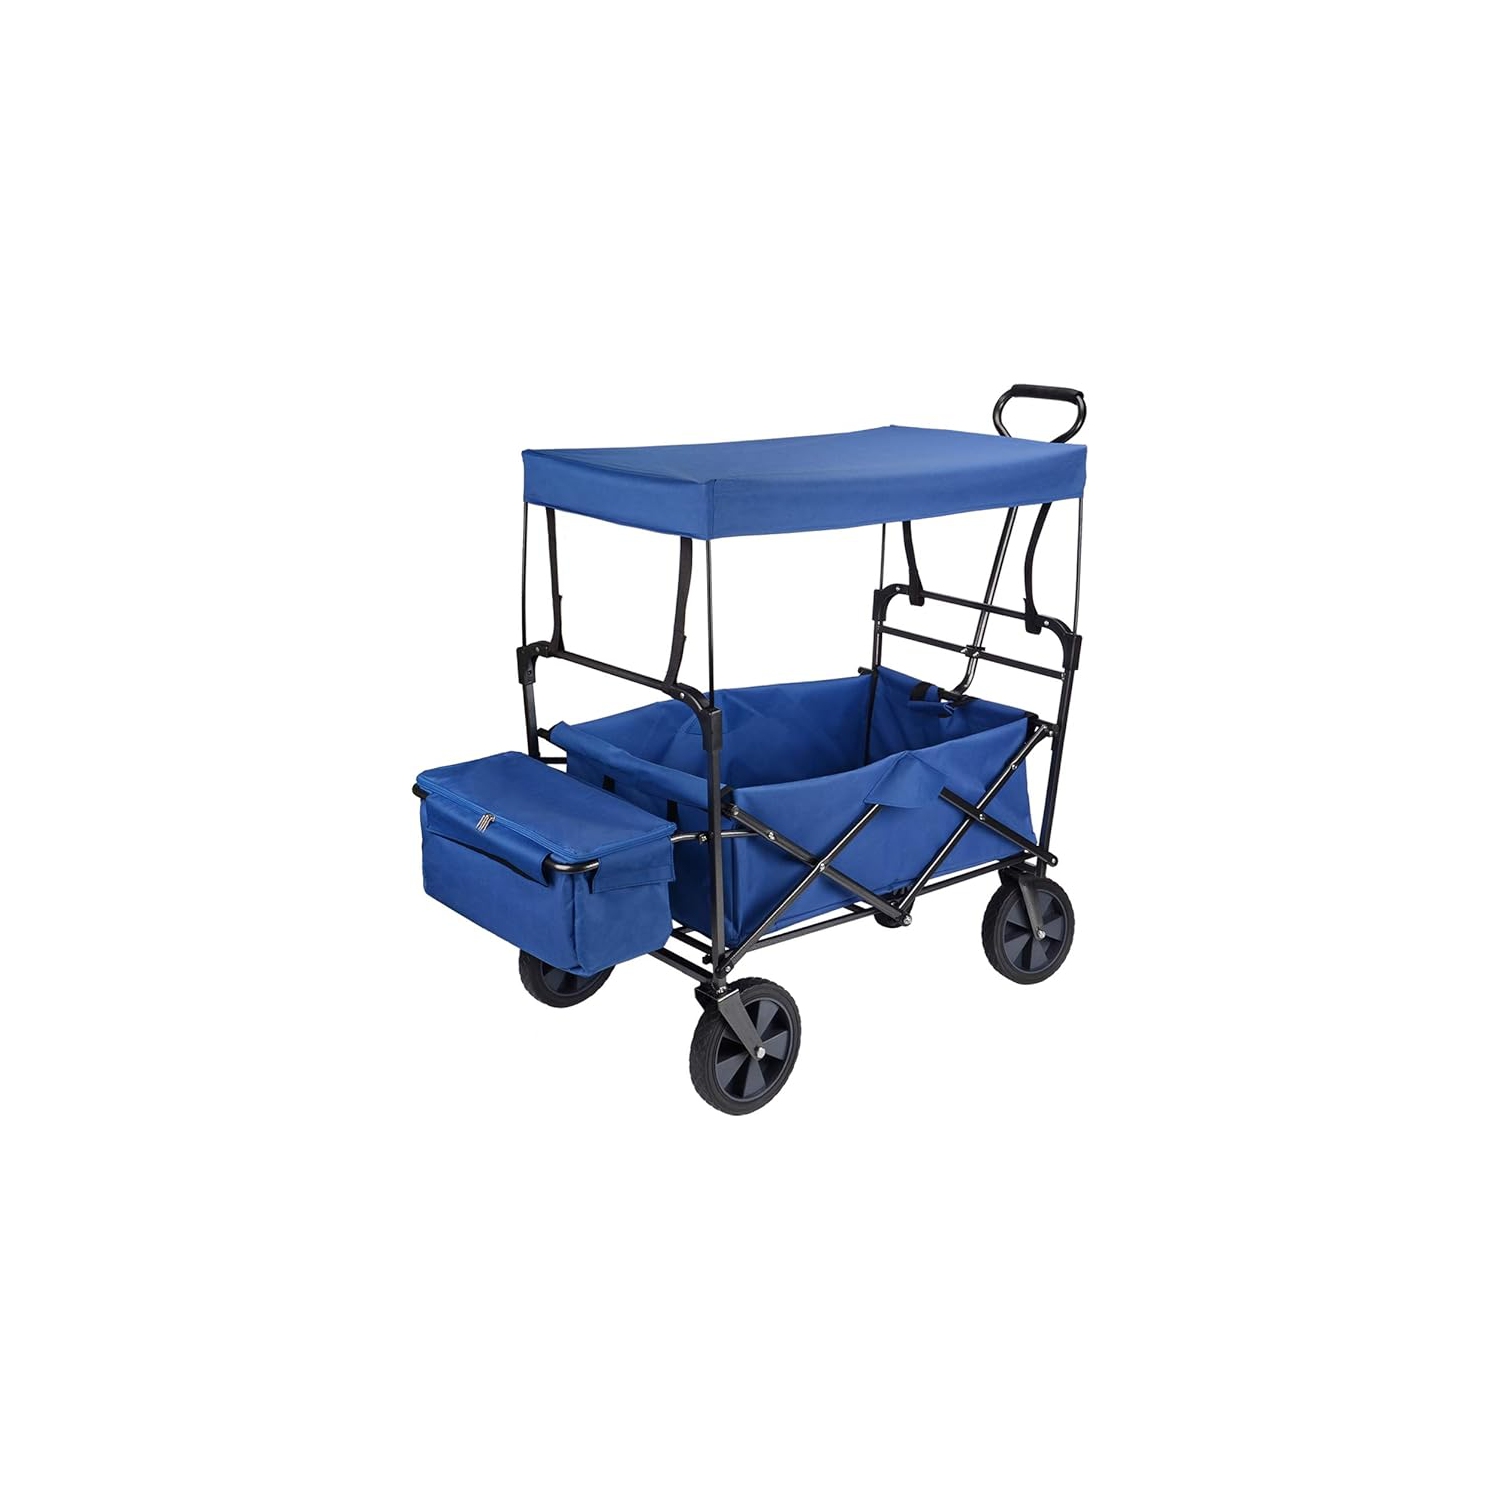 Blue Collapsible Canopy Folding Wagon Utility Cart Rubber Tire Garden Shopping Toy Cart